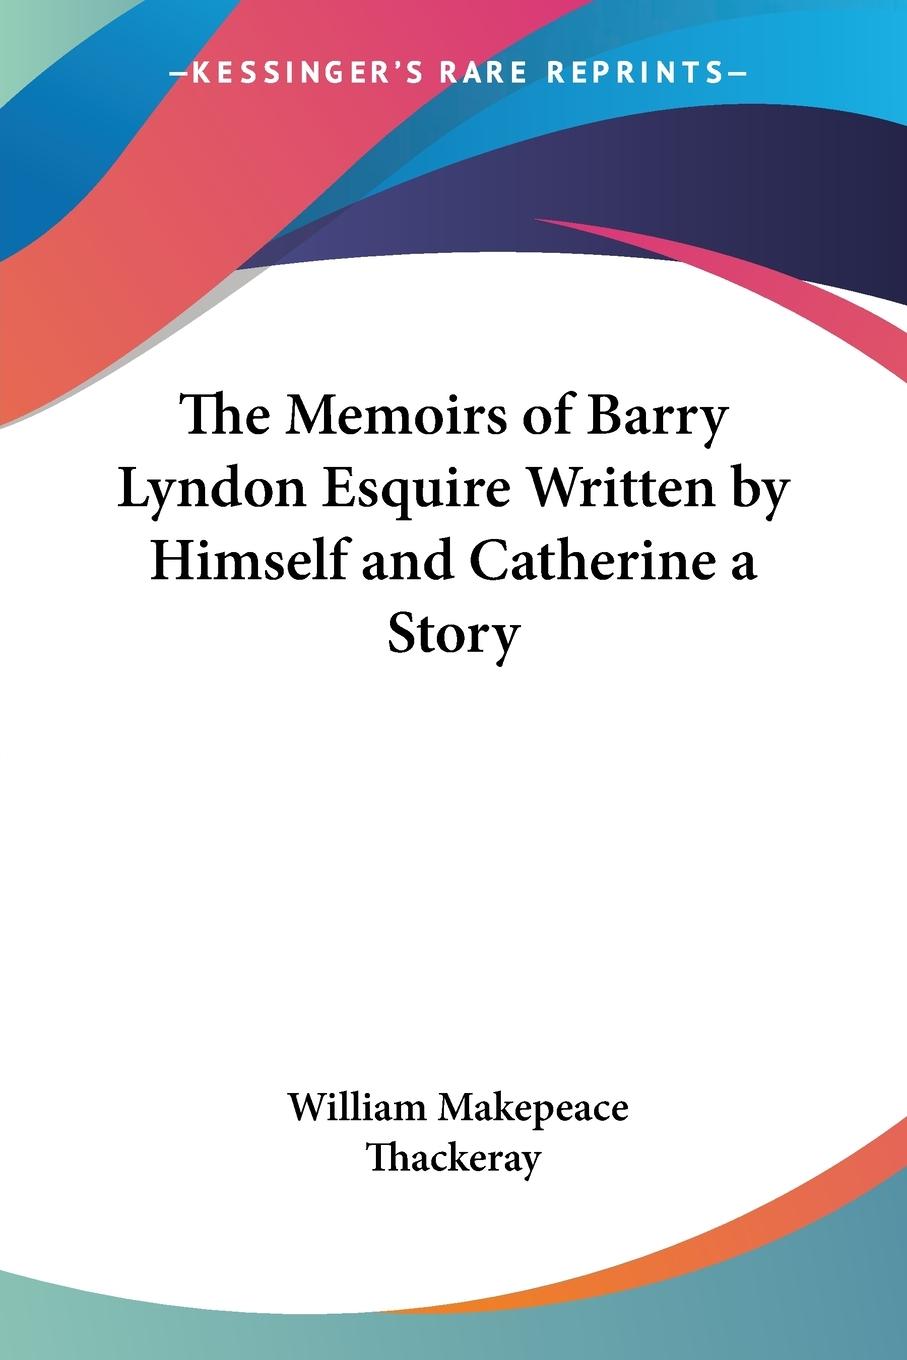 The Memoirs of Barry Lyndon Esquire Written by Himself and Catherine a Story